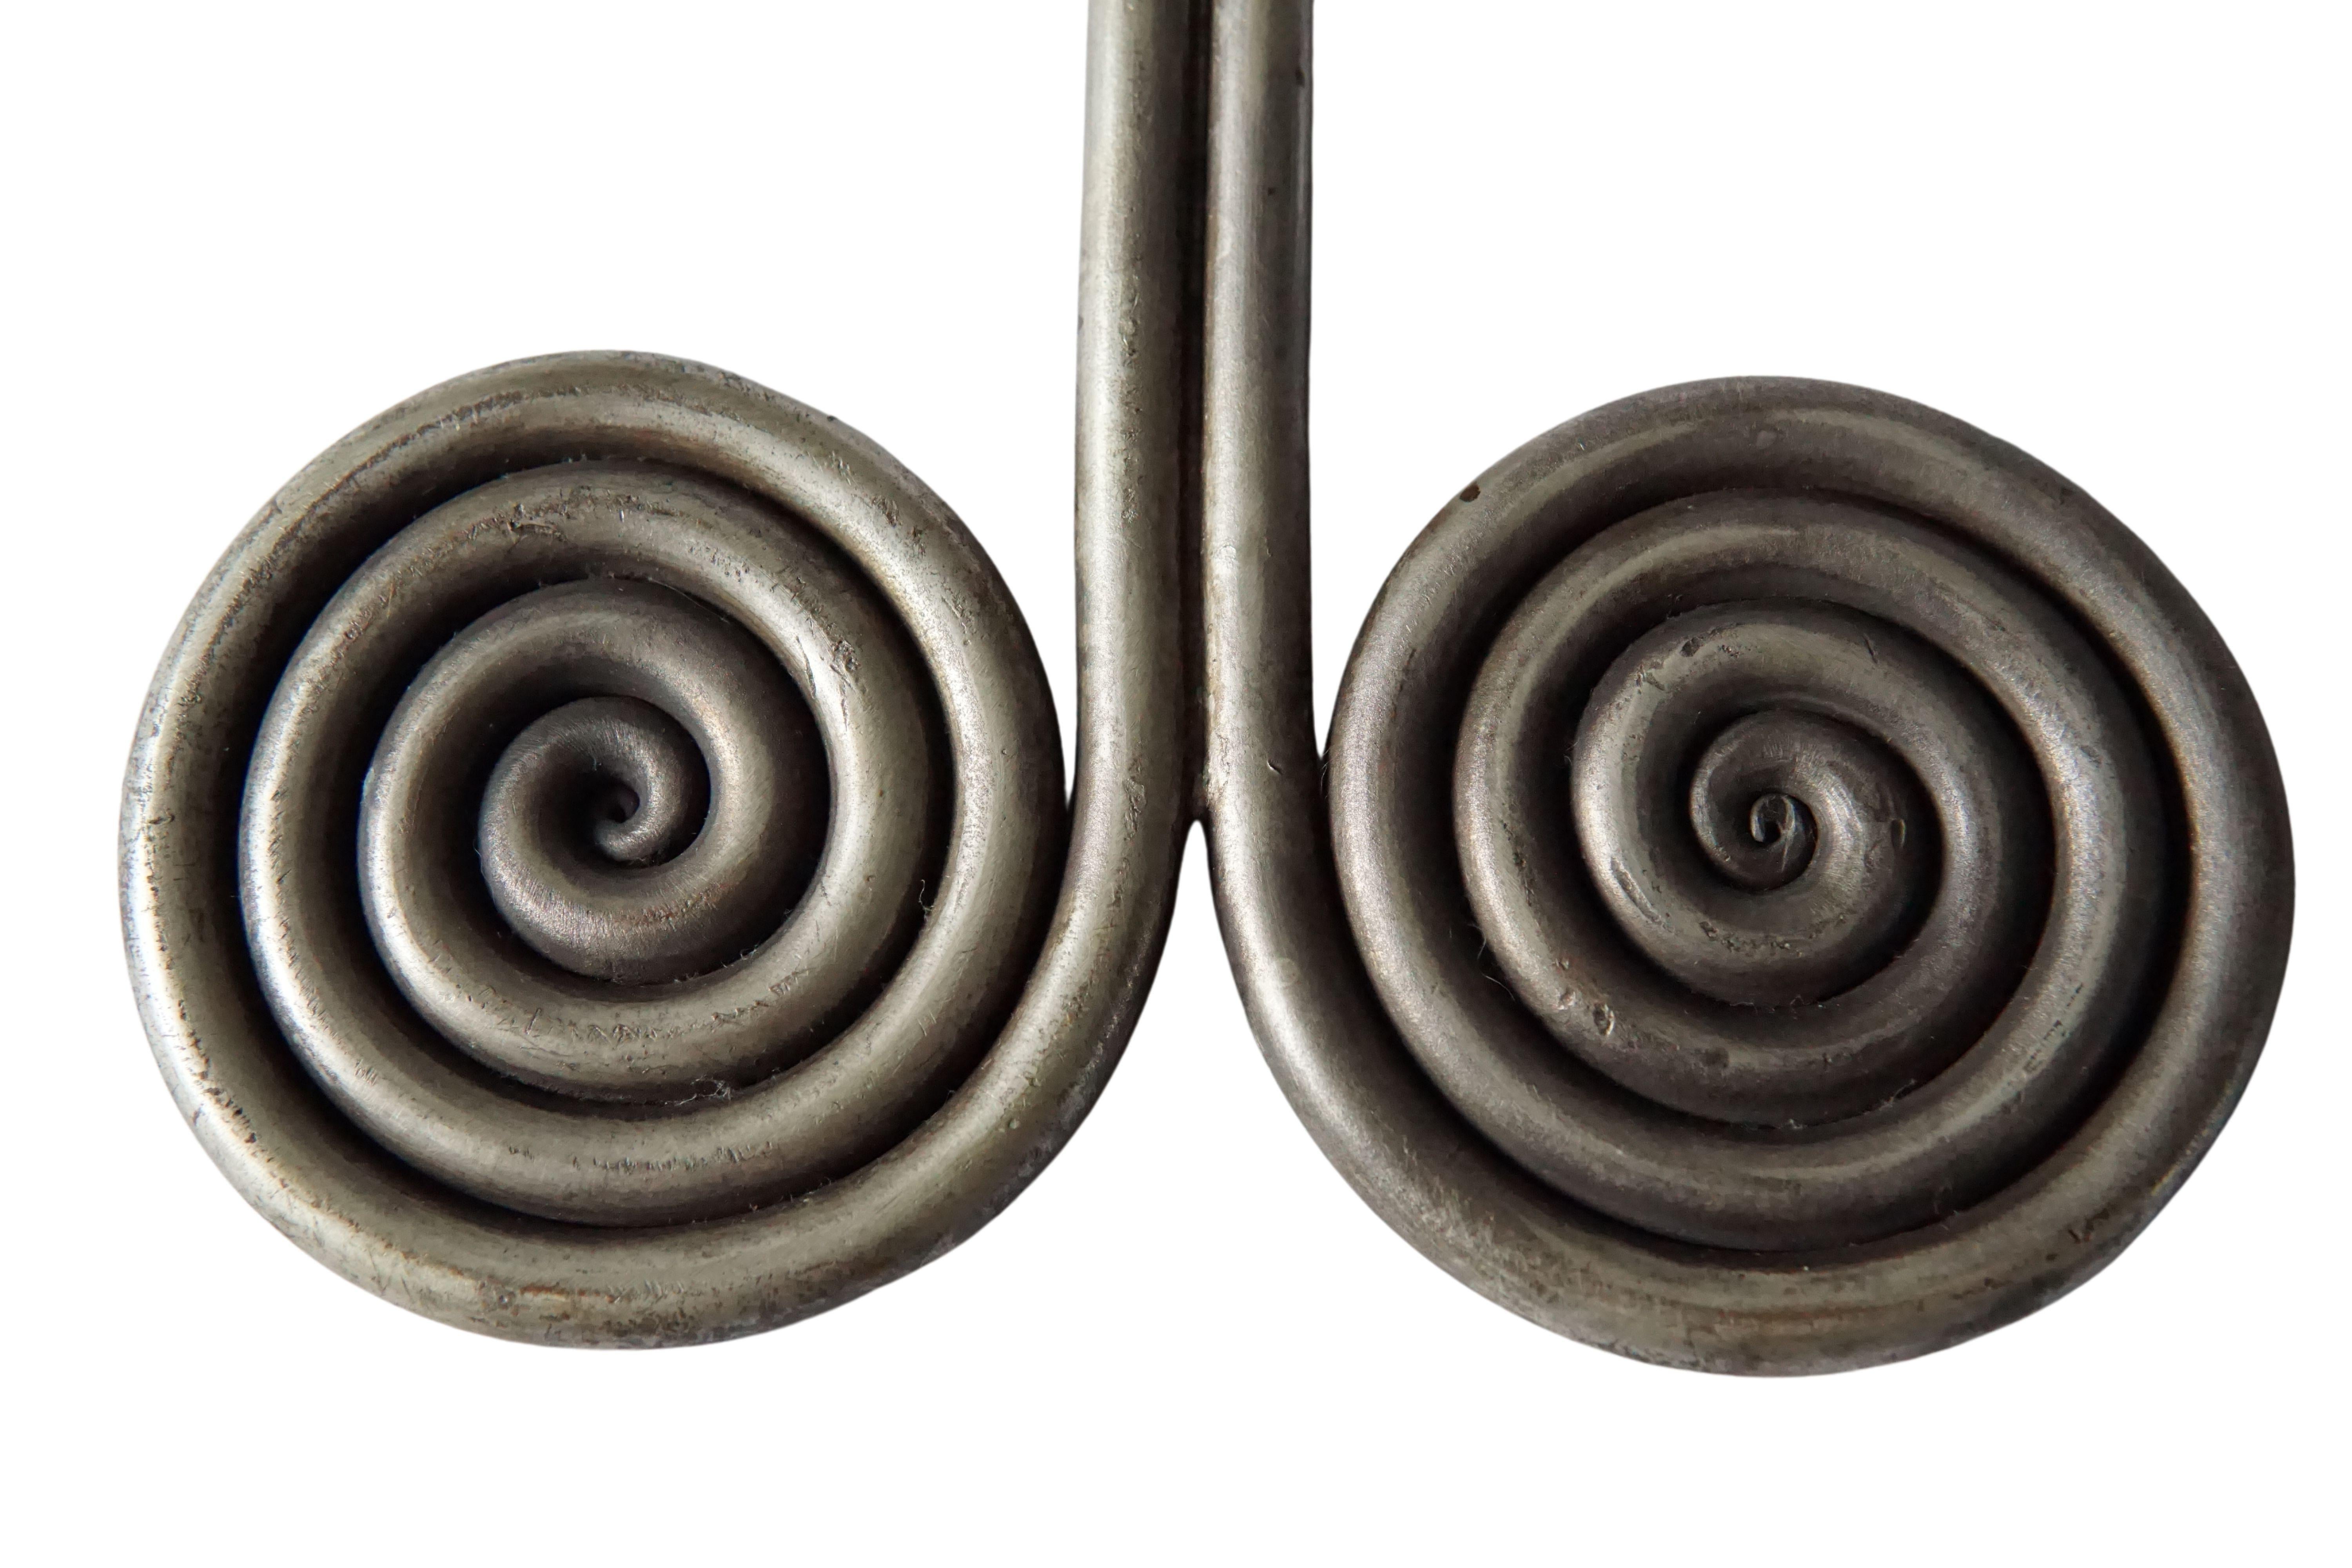 These large spiral brass earrings, crafted from a single thick brass wire are called 'Padung', a type of earring worn by the Batak Karo Tribe from northern Sumatra, Indonesia. This large low grade silver & brass spiral earring are completely solid,